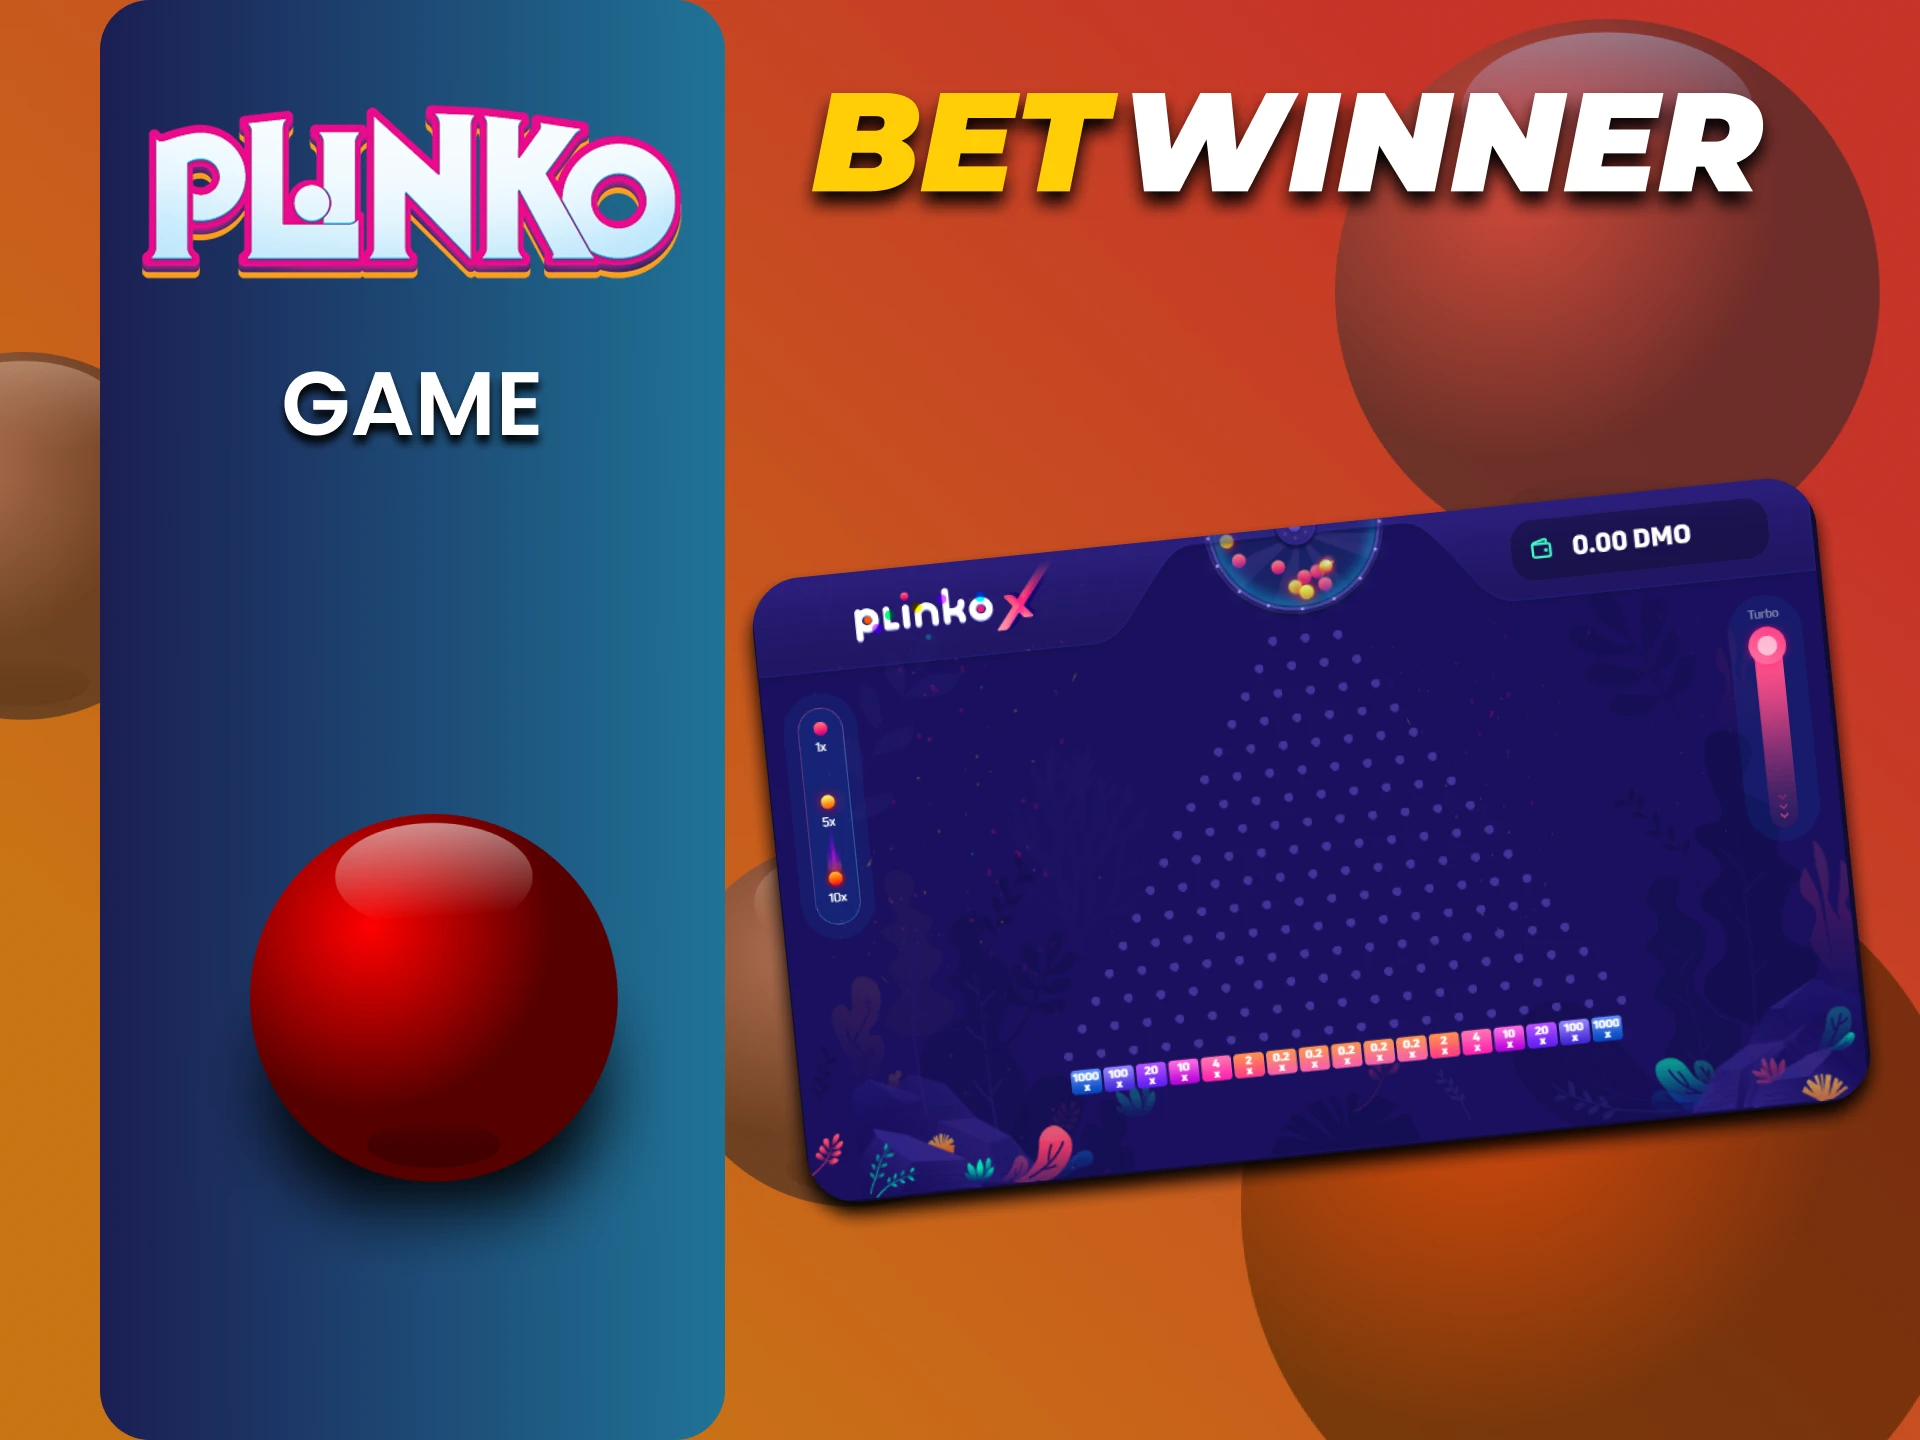 We tell you all about playing Plinko at Betwinner.